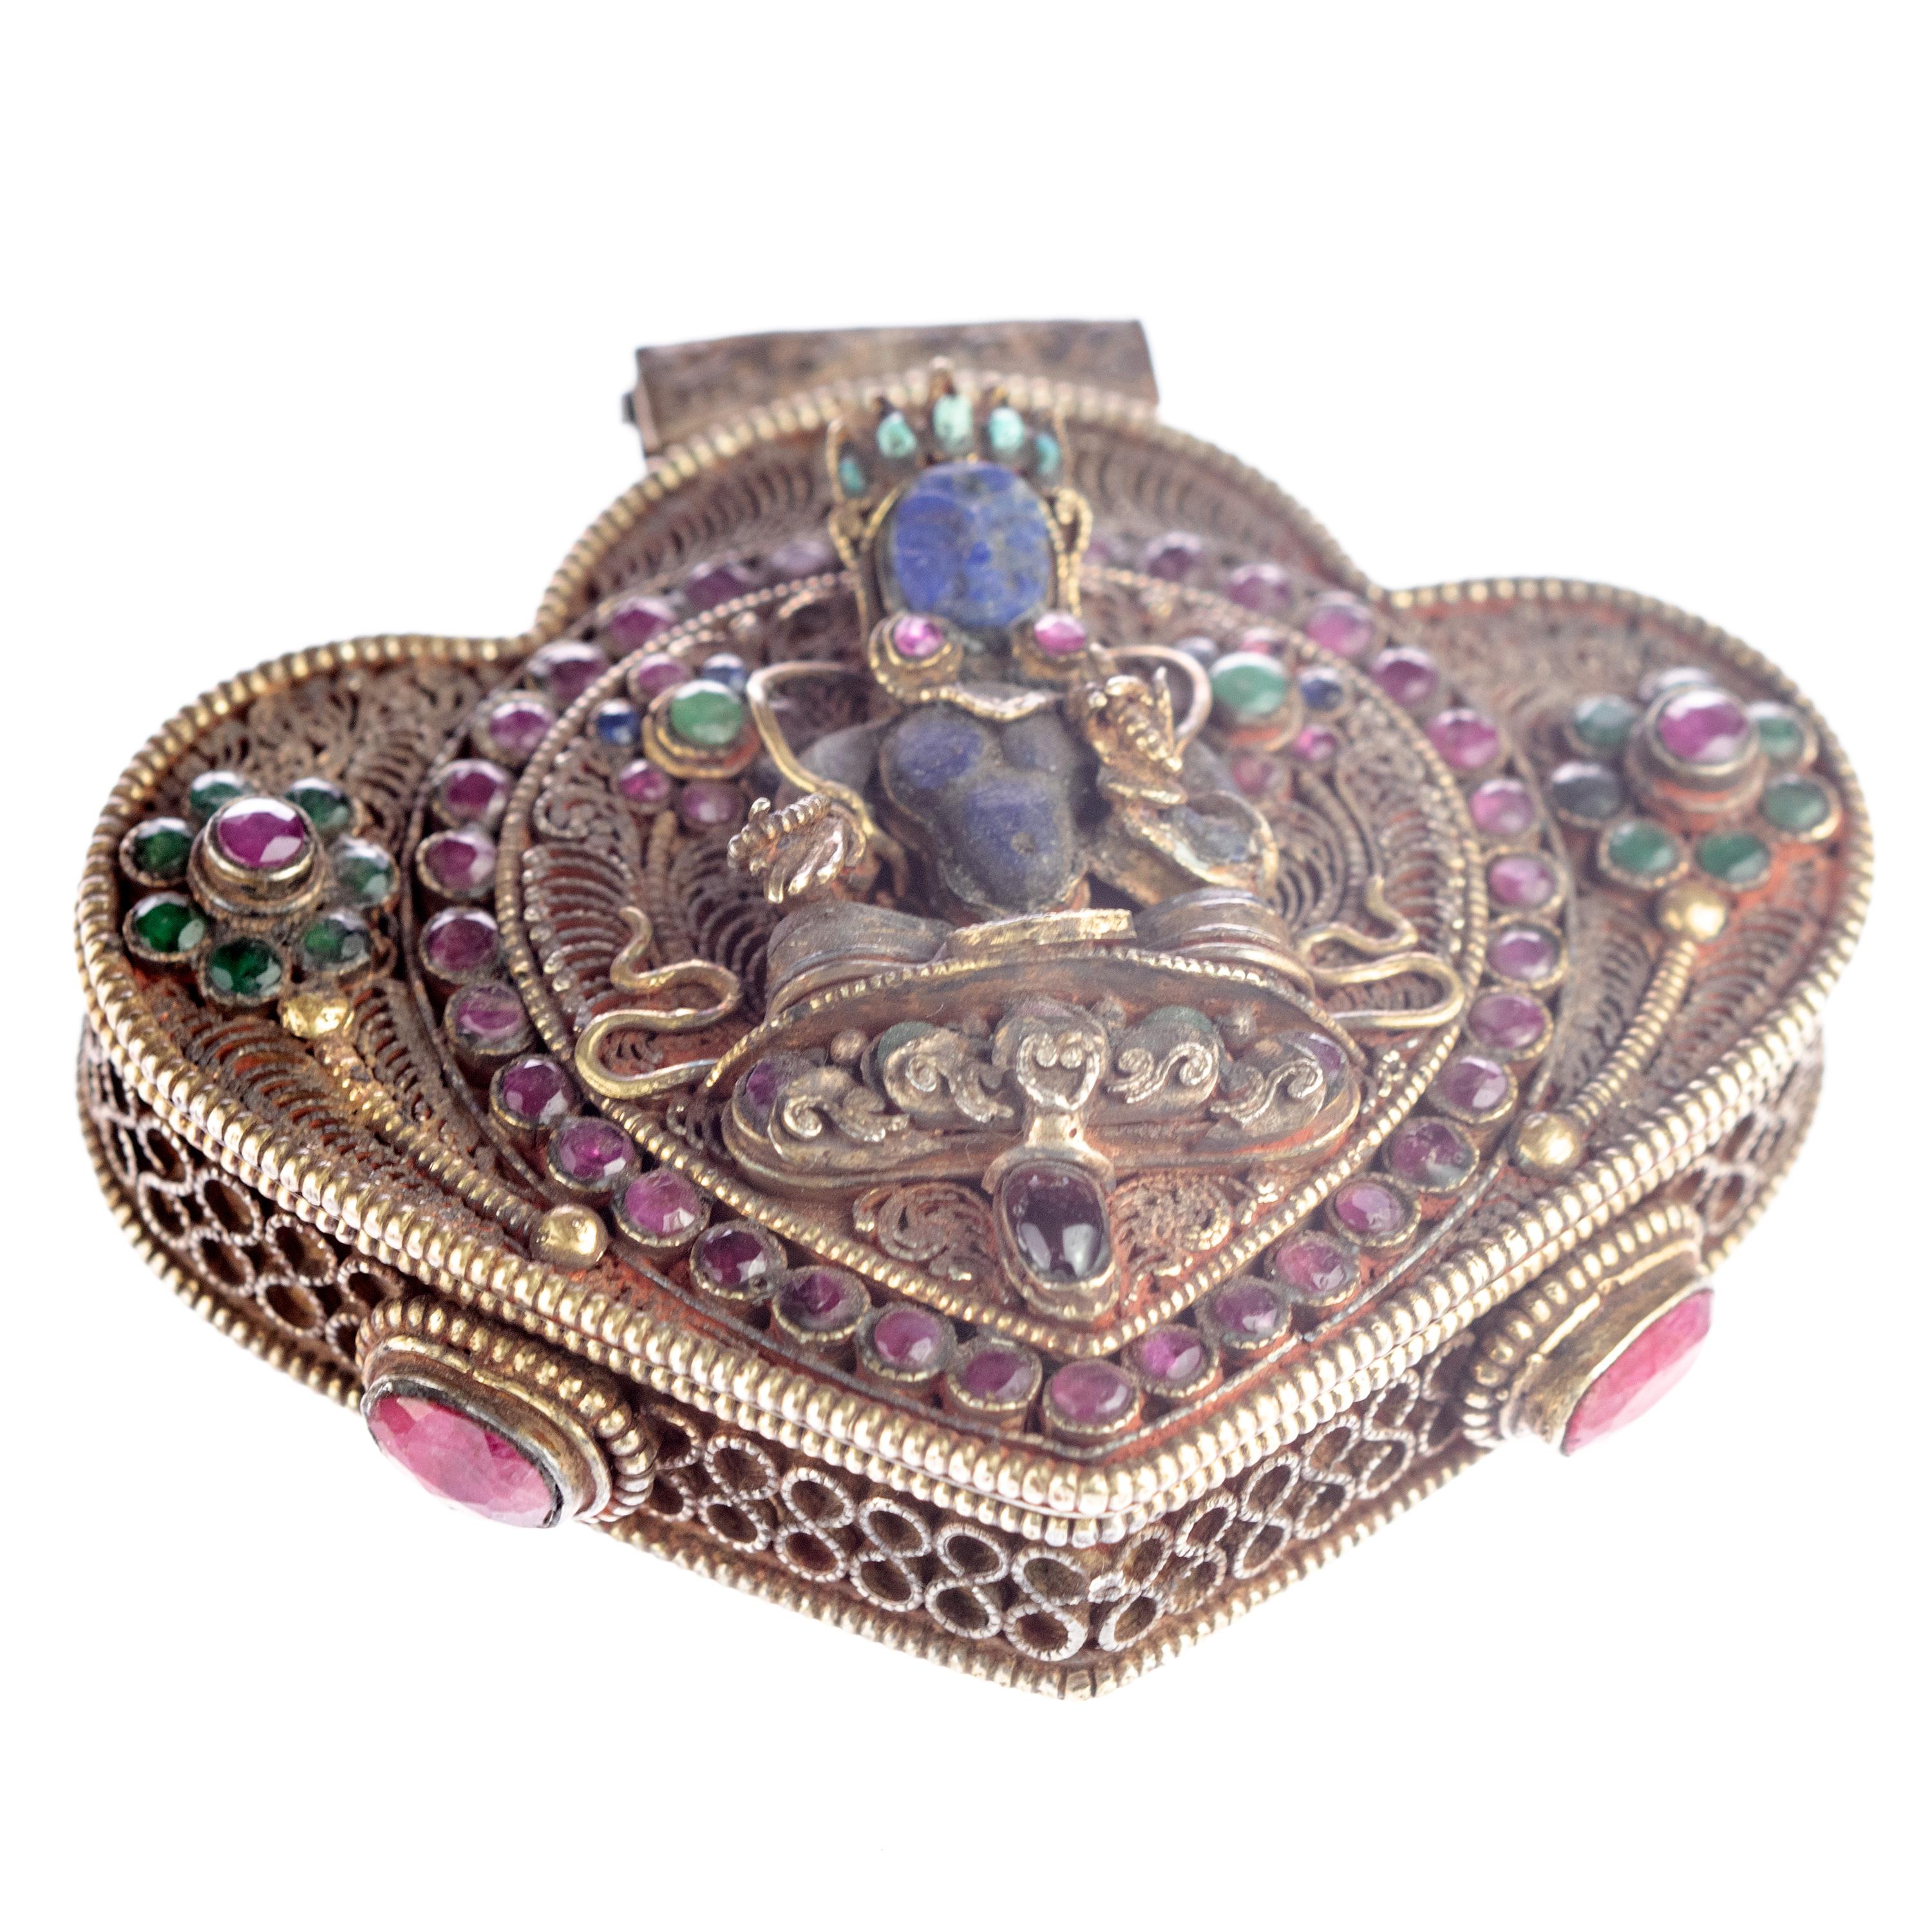 Spectacular Tibetan Buddhist Prayer Pendant Jewelry Box delicately decorated with Lapis Lazuli Turquoise Ruby Emerald and Corals. An article full of color and history, showing emphatically Tibetan culture, the importance of spirituality and the